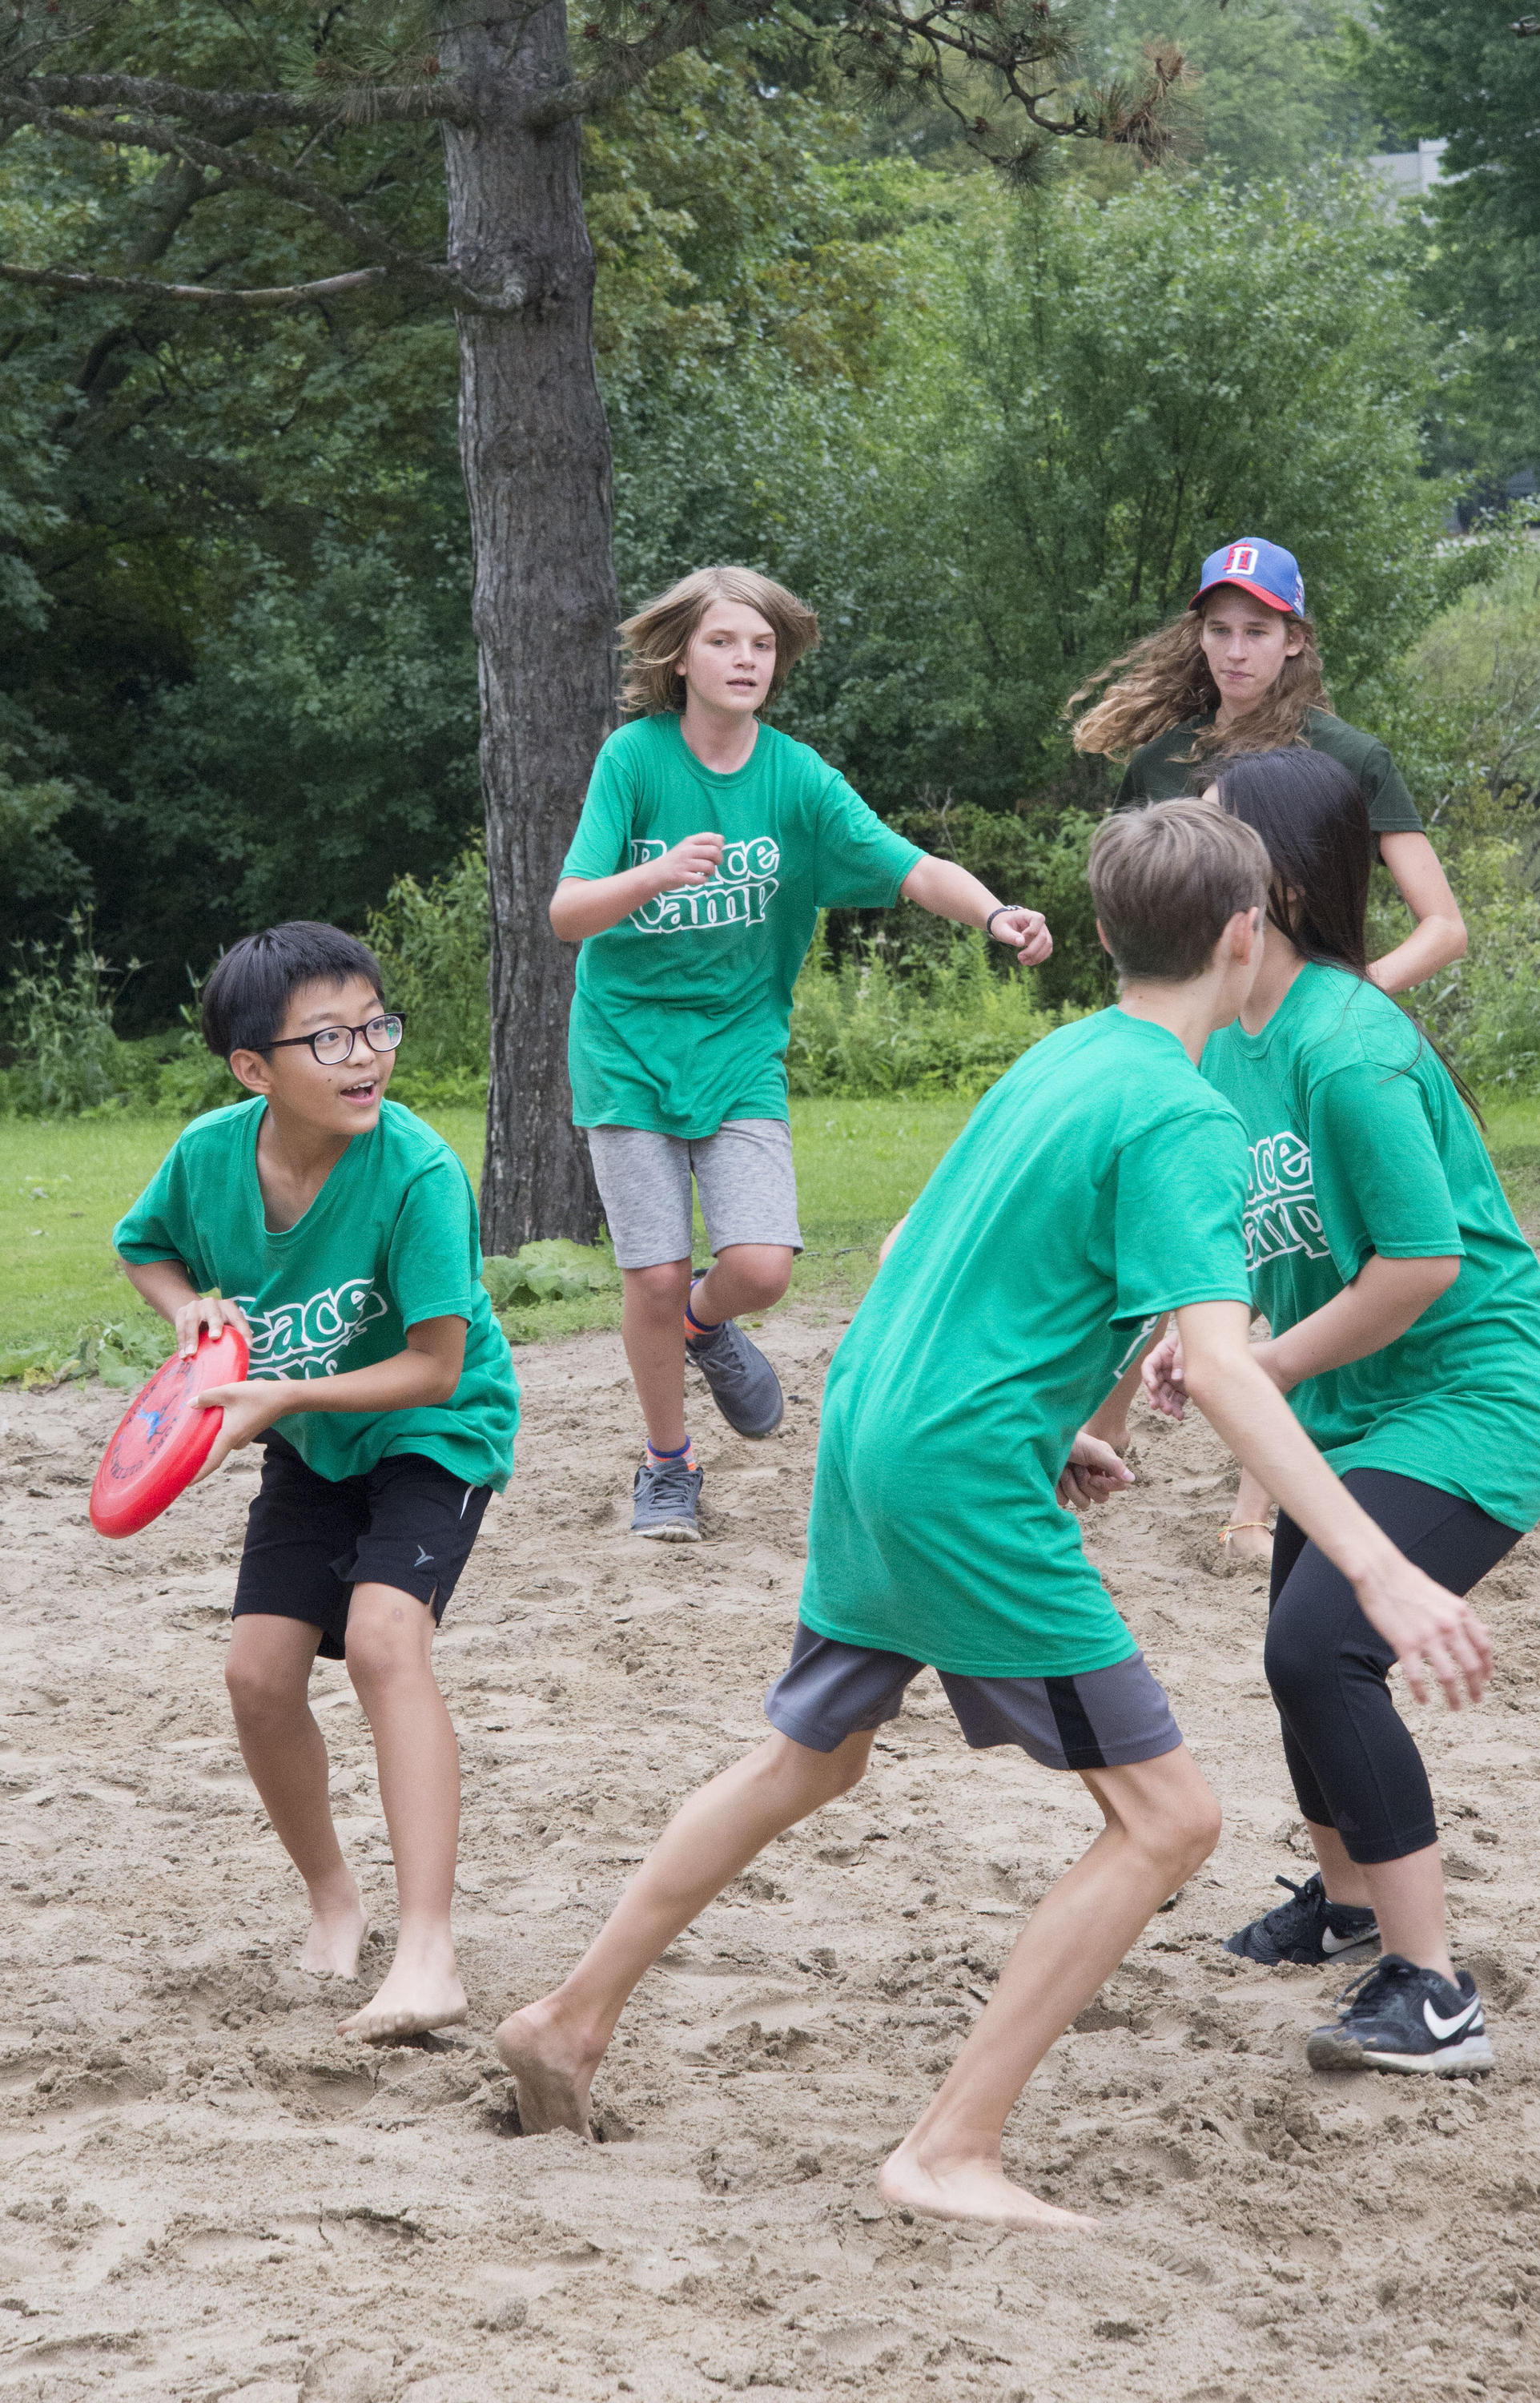 Peace Camp games